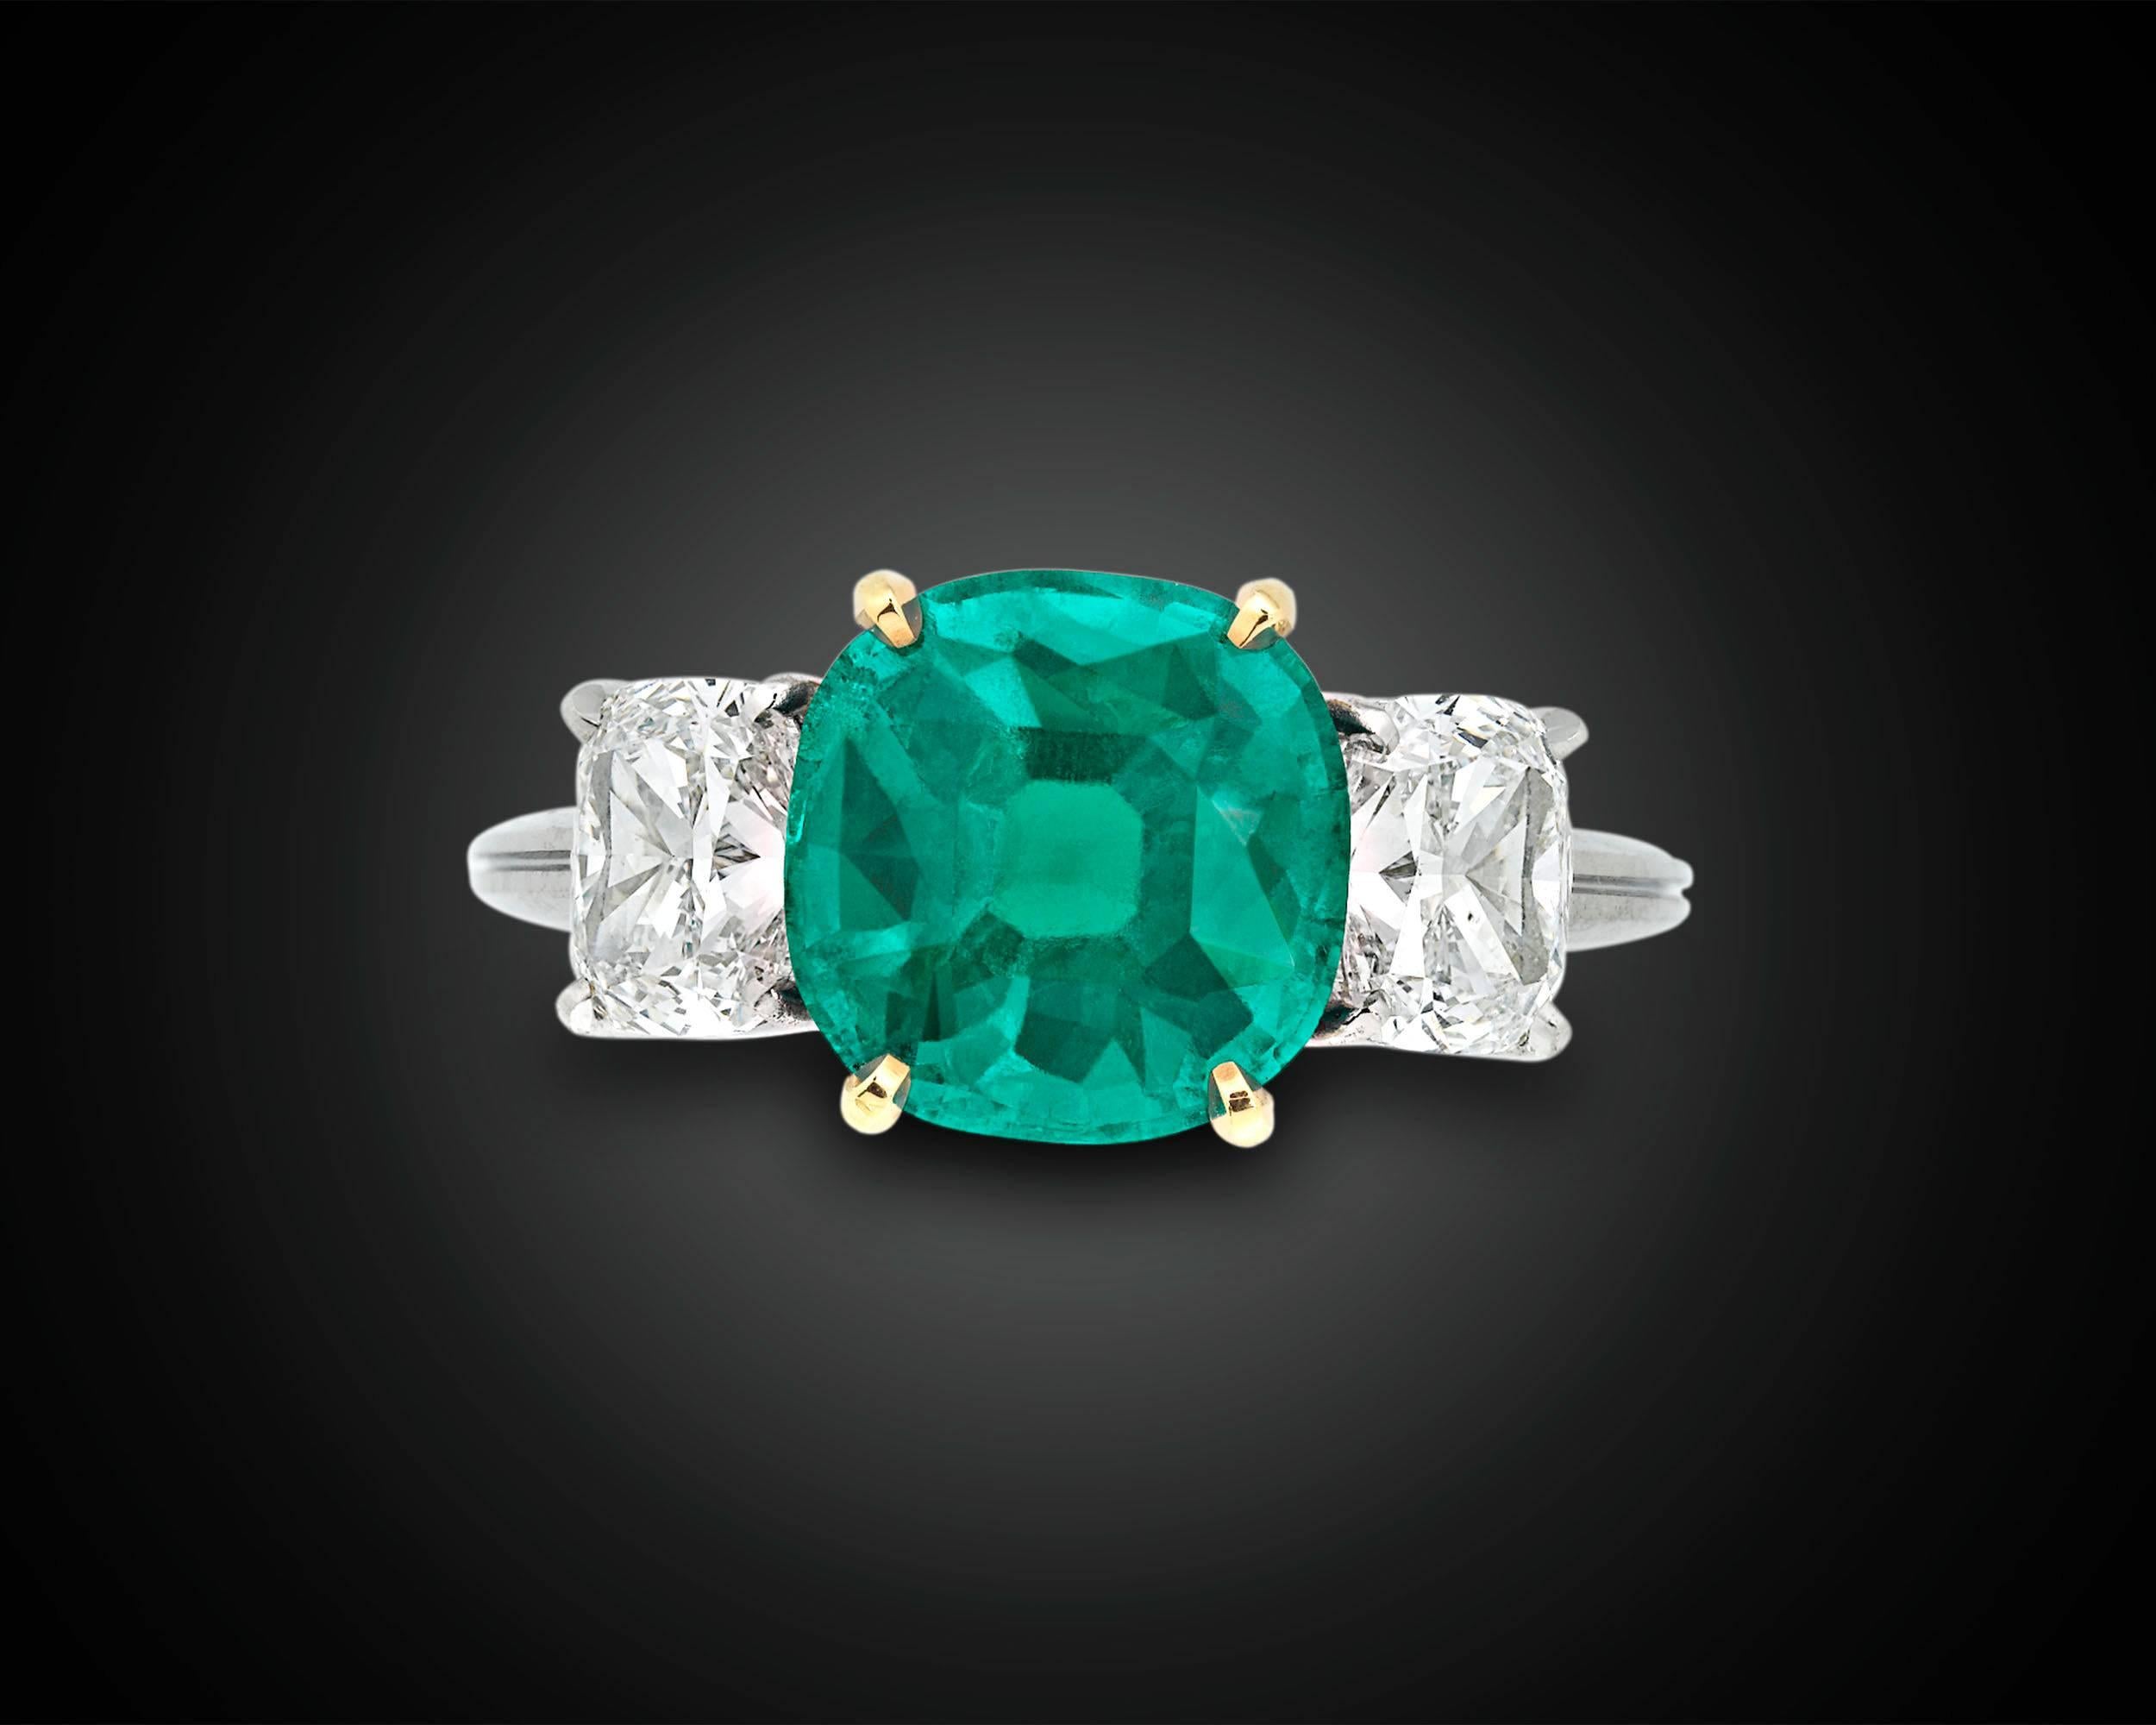 A stunning Colombian emerald exhibits an extraordinarily rare and coveted velvety hue in this captivating ring. Certified by the American Gemological Laboratories as being completely natural and untreated by oil, the 3.04-carat cushion modified